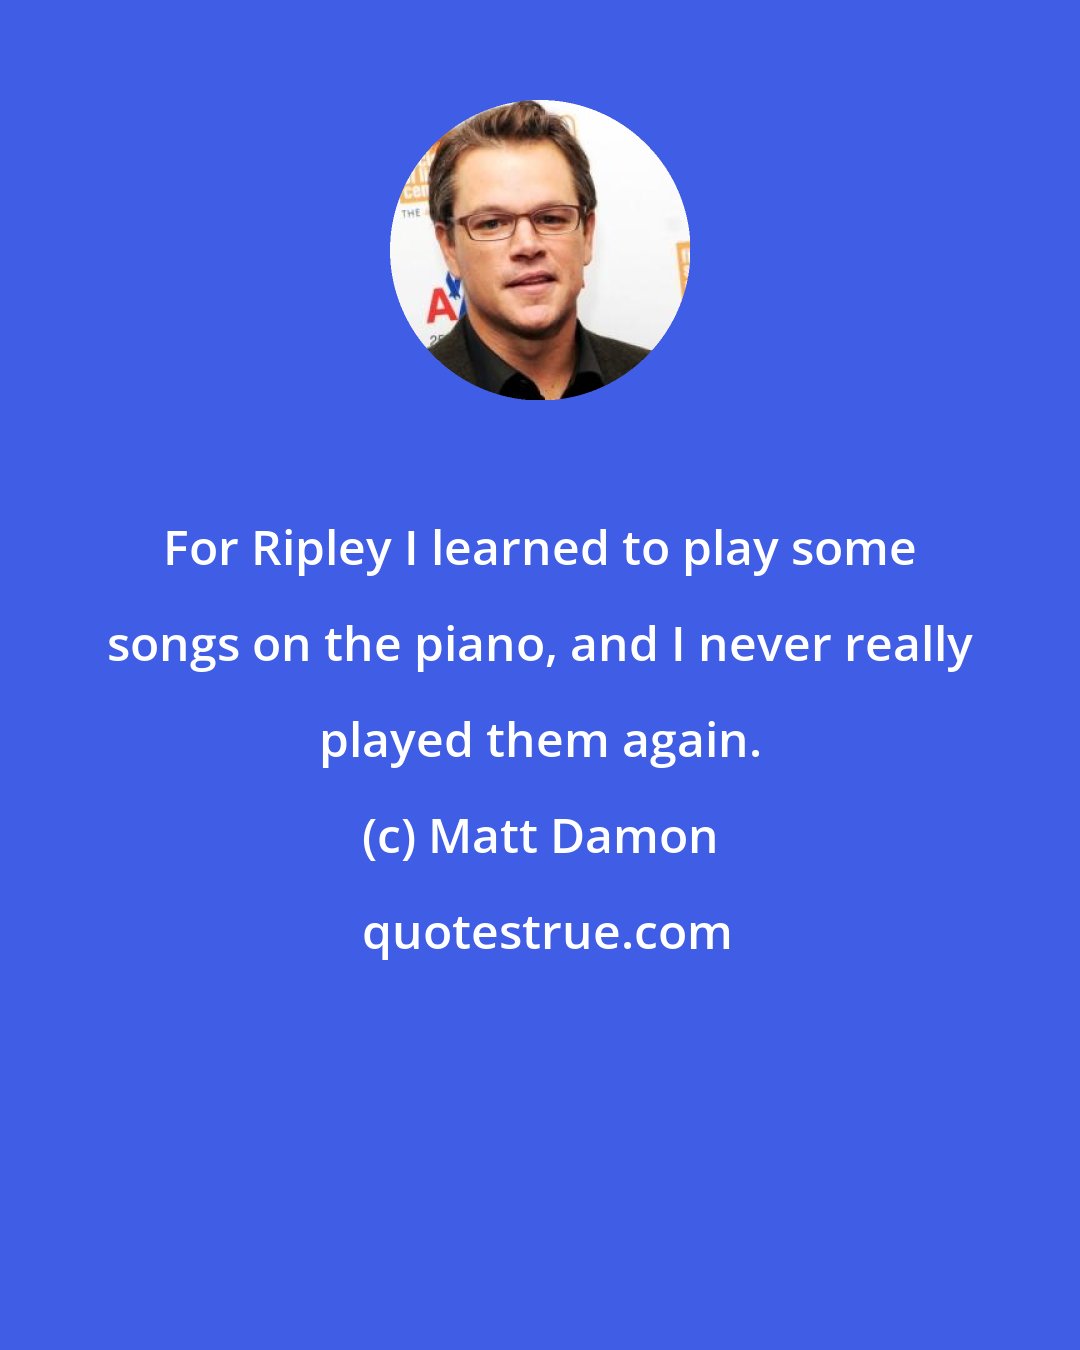 Matt Damon: For Ripley I learned to play some songs on the piano, and I never really played them again.